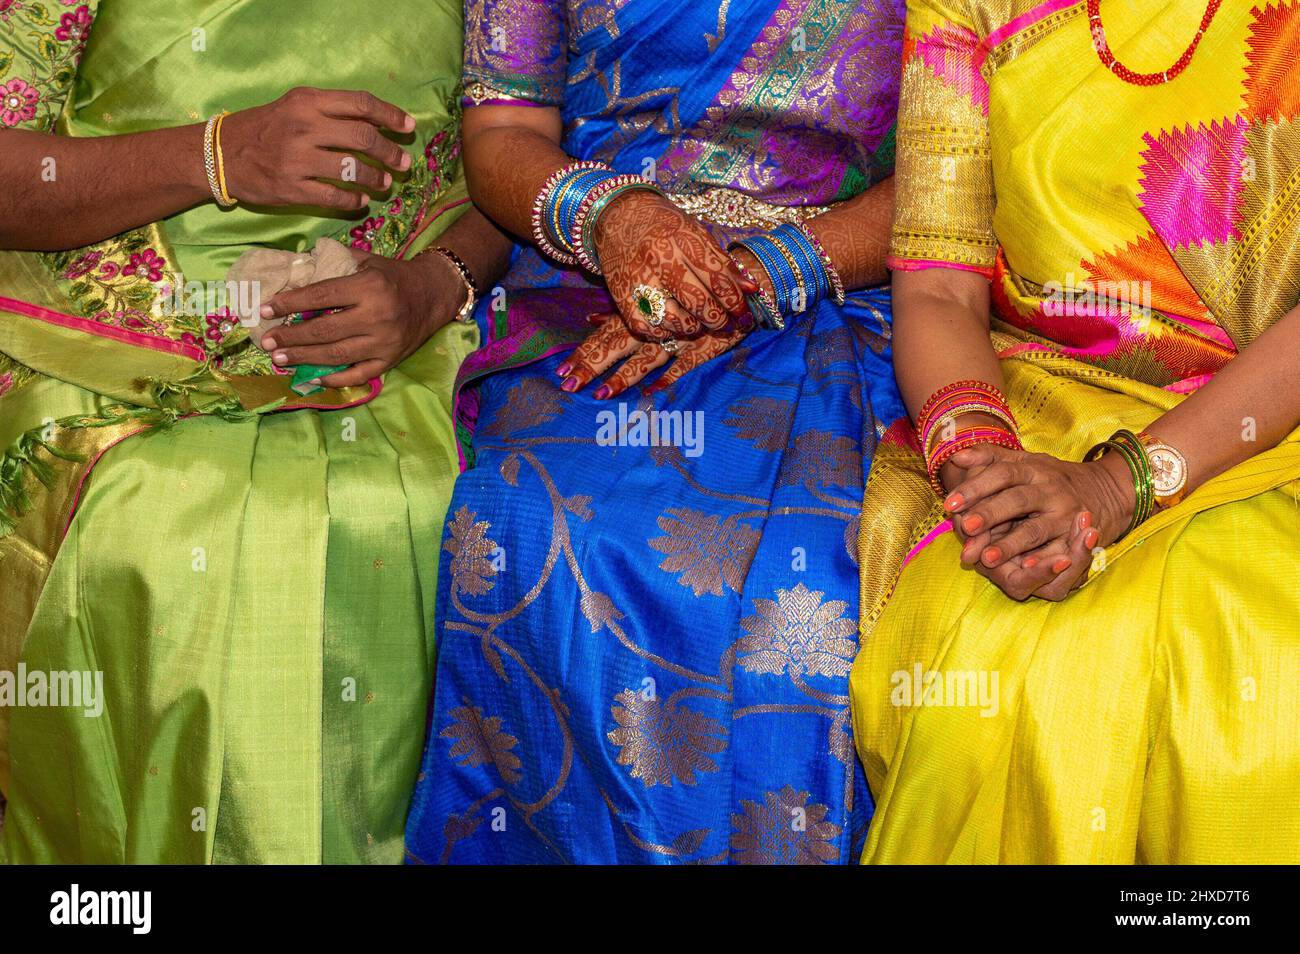 Women with jewelry and colorful sarees during an Indian wedding, Rajapalayam, India Stock Photo